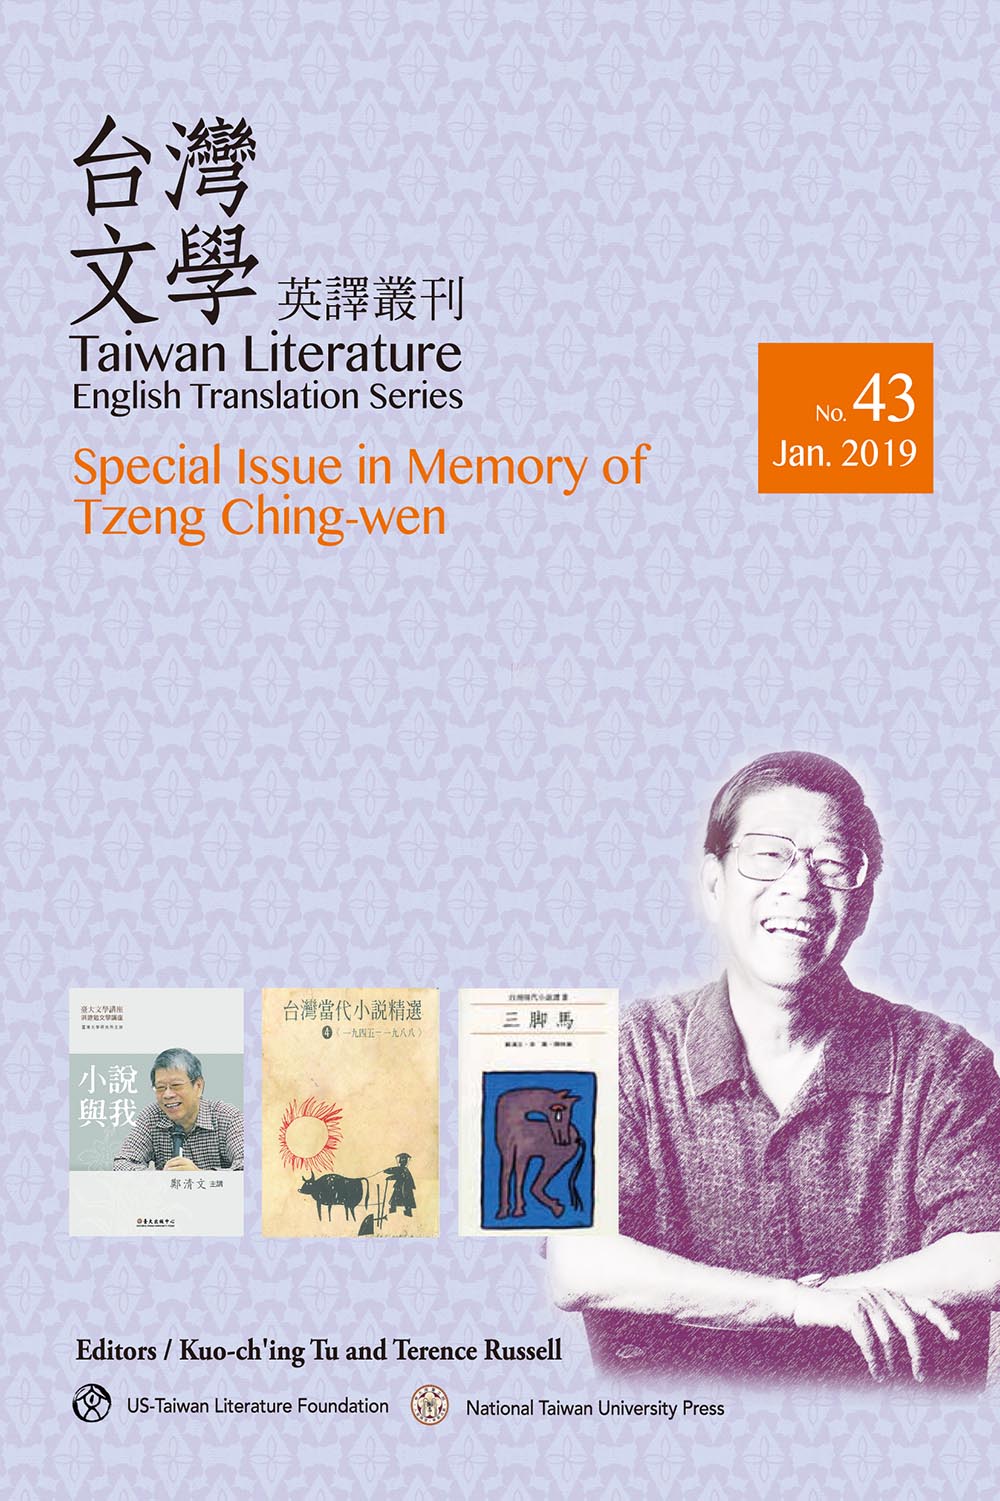 Taiwan Literature: English Translation Series, no. 43 (Special Issue in Memory of Tzeng Ching-wen)